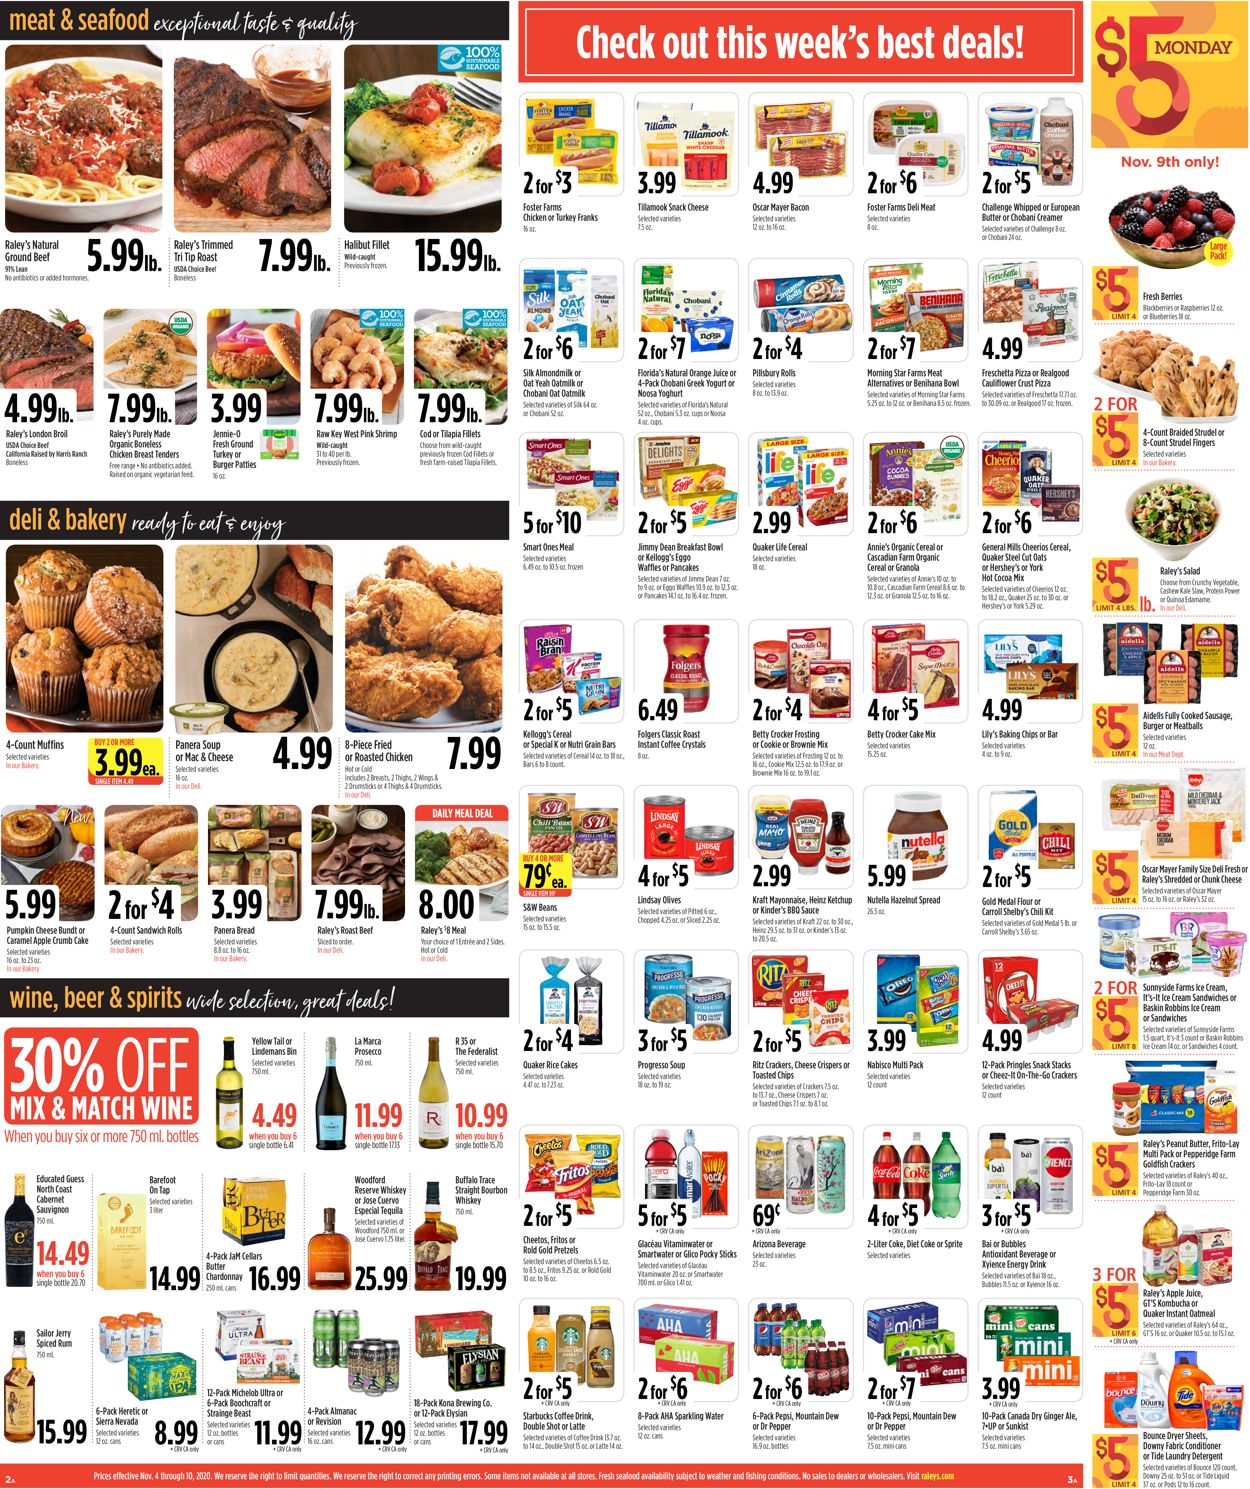 Raley's Ad from 11/04/2020